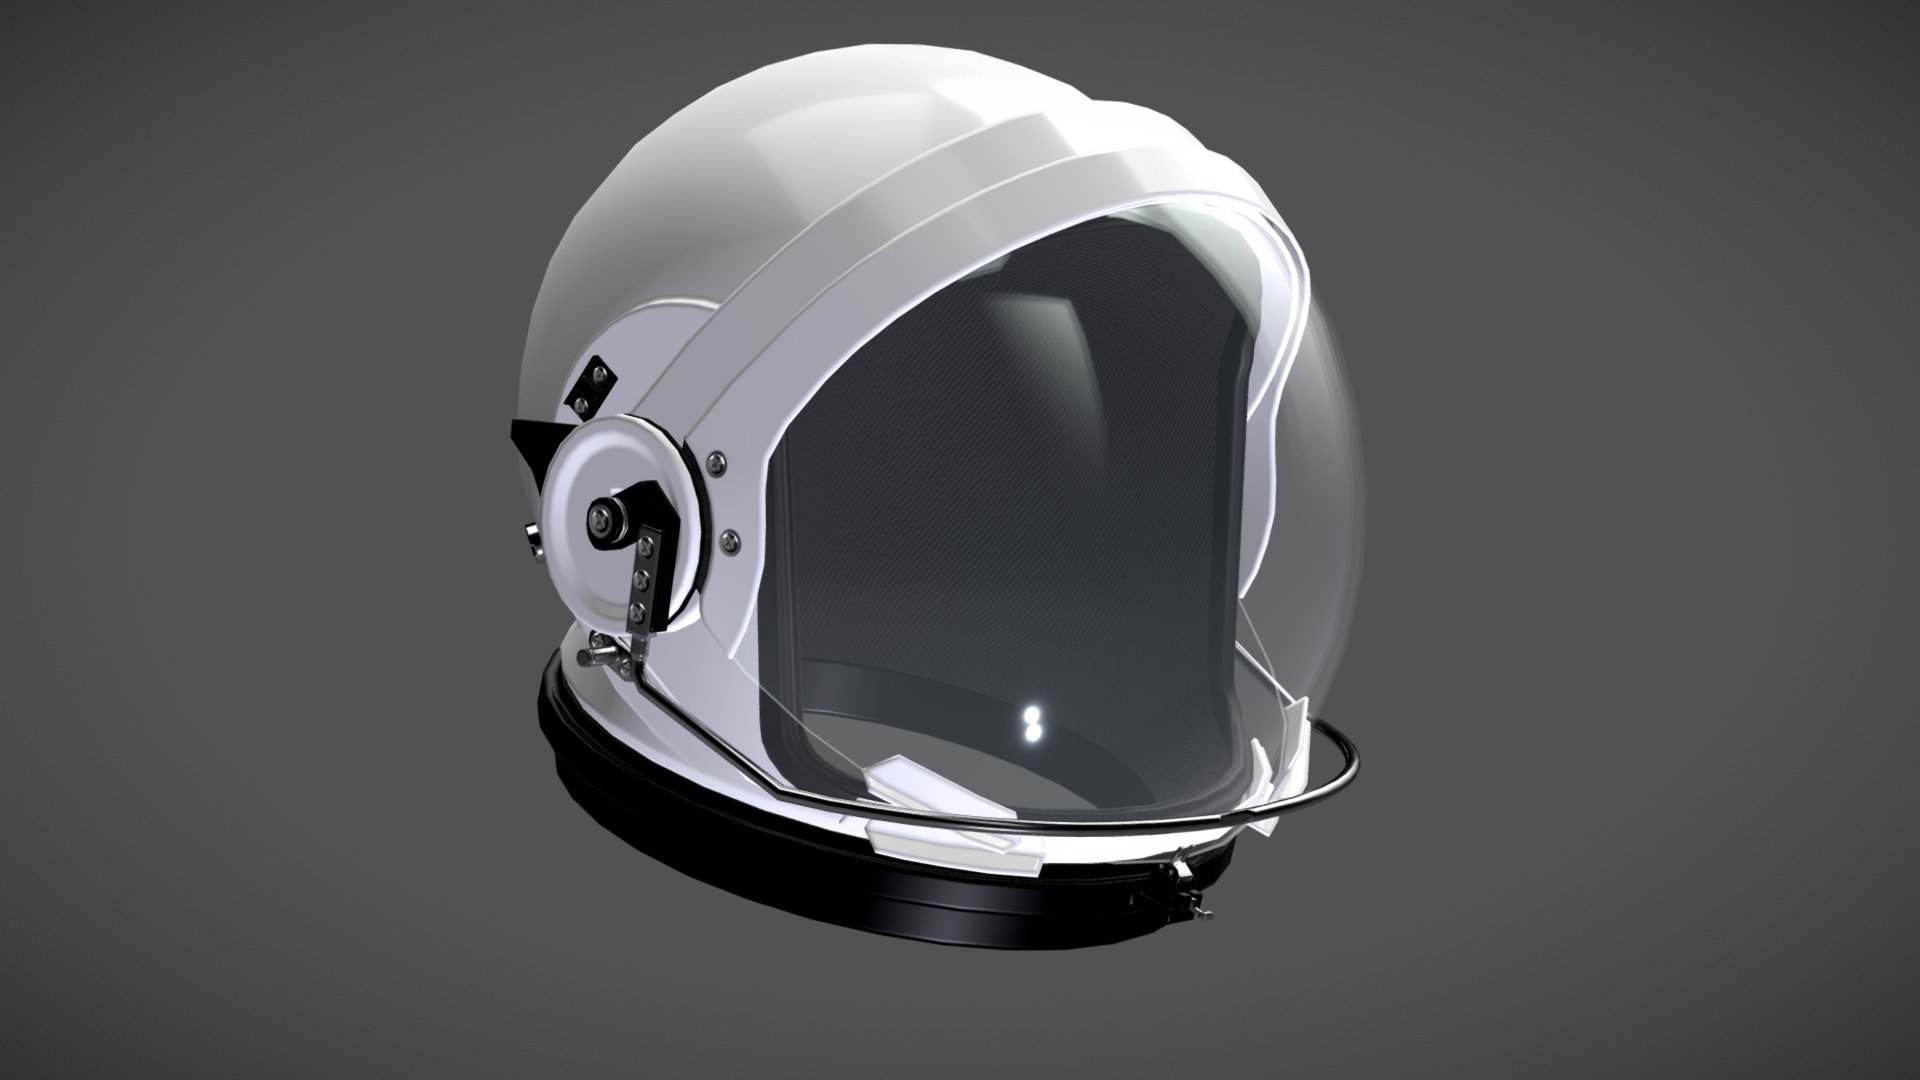 Realistic Lowpoly Helmet of the Orion Astronaut Suit

This helmet has 3390 polys and uses PBR Textures, these textures are divided in three layouts, Helmet, Glass and Screws.

The Helmet layout has a resolution of 2048x2048
The Glass layout has a resolution of 512x512
The Screws layout has a resolution of 256x128

All these layout has BaseColor, Metallic, Roughness, Normals(Helmet and Screw) and Opacity(Glass and Screws) 

The textures are in PNG format

The helmet has propper pivots so it can be easily setup and animateable in any project - Lowpoly Orion Astronaut Suit Helmet - Buy Royalty Free 3D model by rfarencibia 3d model